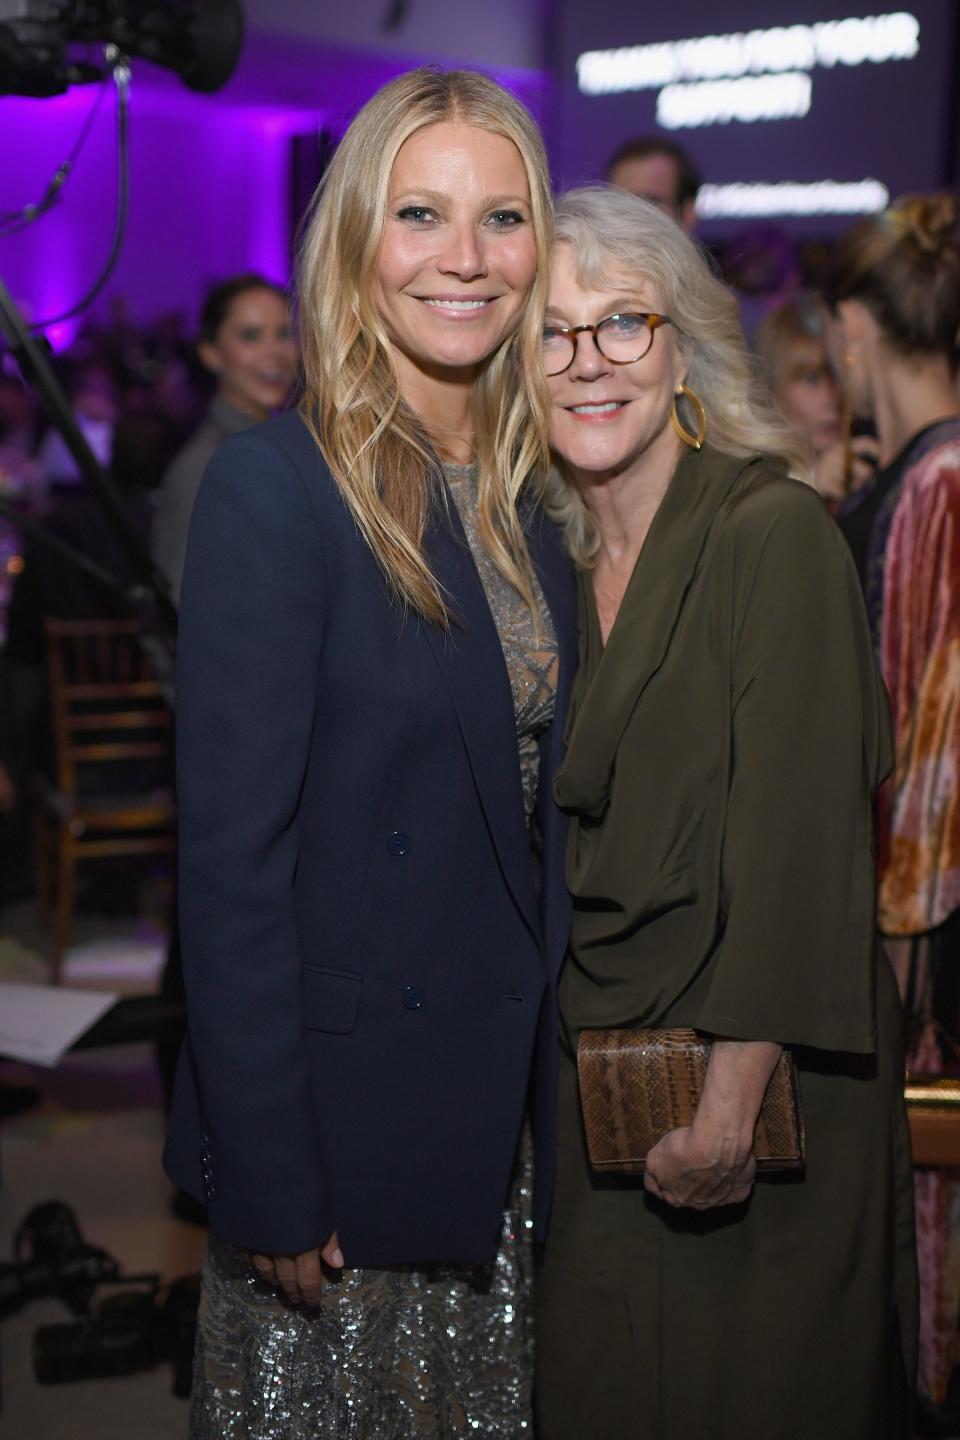 Gwyneth Paltrow and her mom Blythe Danner at the 11th Annual Golden Heart Awards in 2017.